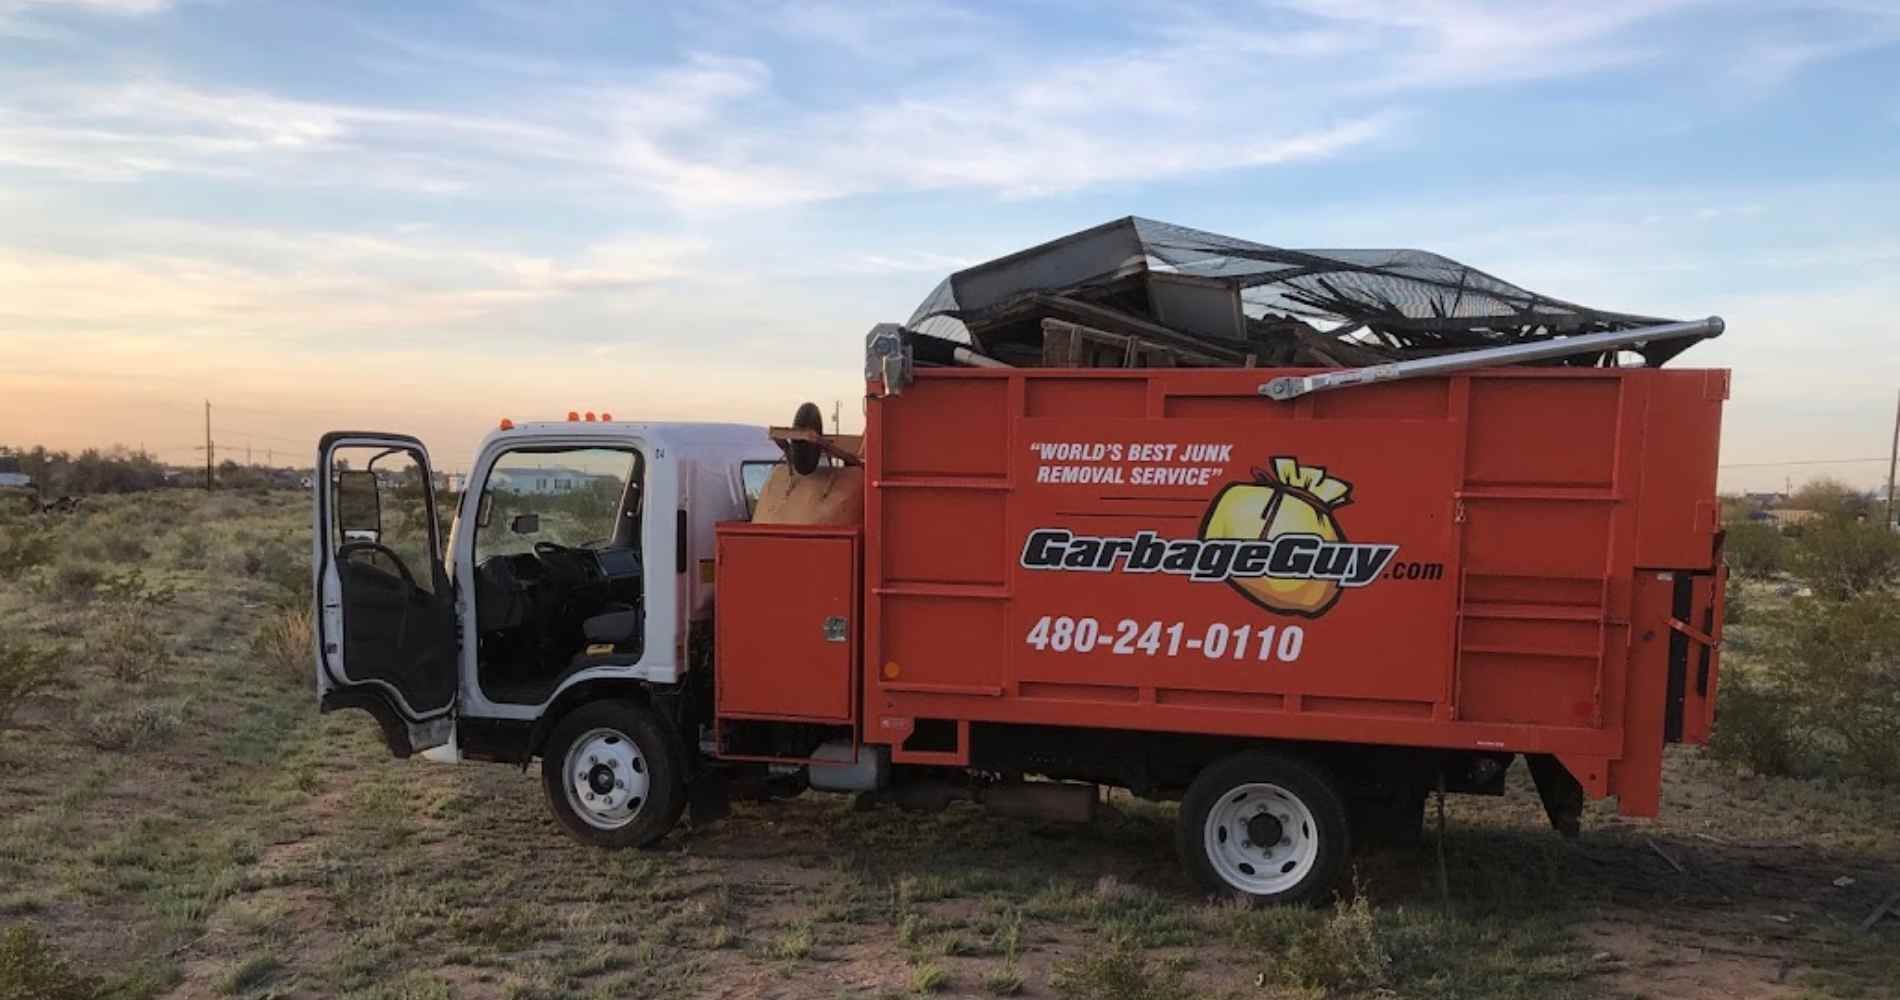 #1 for Junk Removal in Gilbert, AZ with Over 1200 5-Star Reviews!